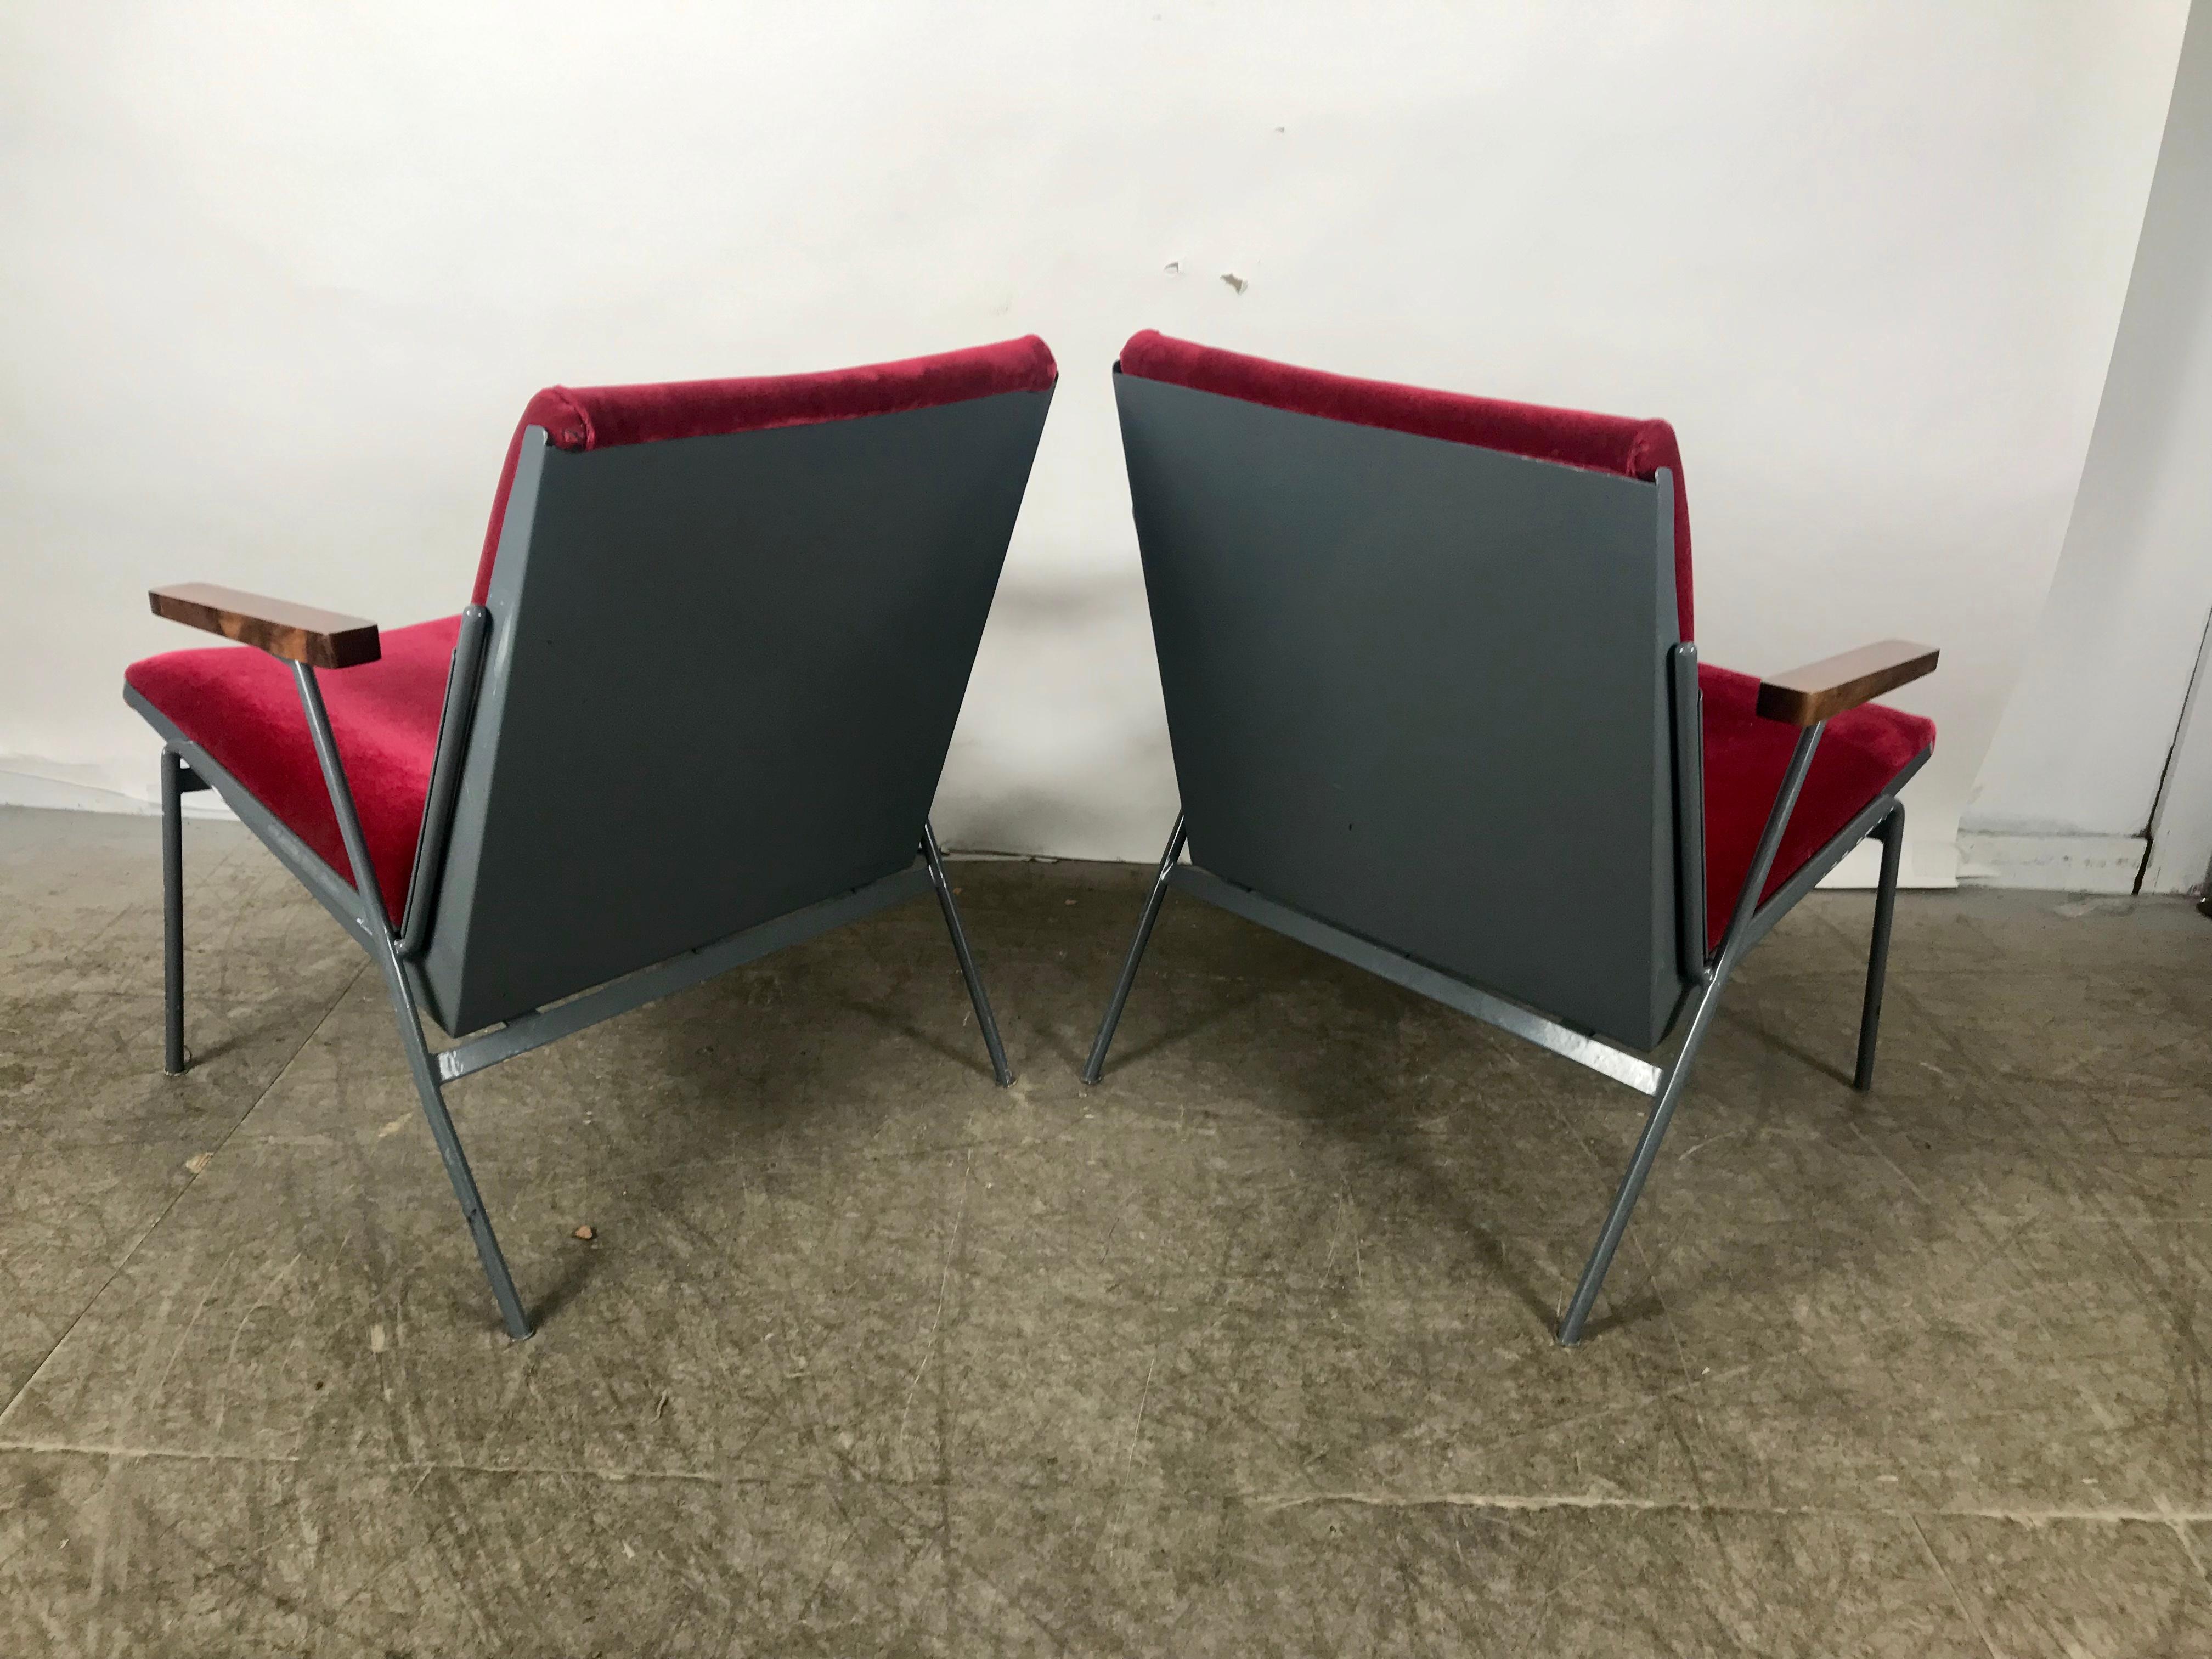 Mid-20th Century Matched Pair of French Modernist Lounge Chairs in Red Mohair Jean Prouve Style For Sale